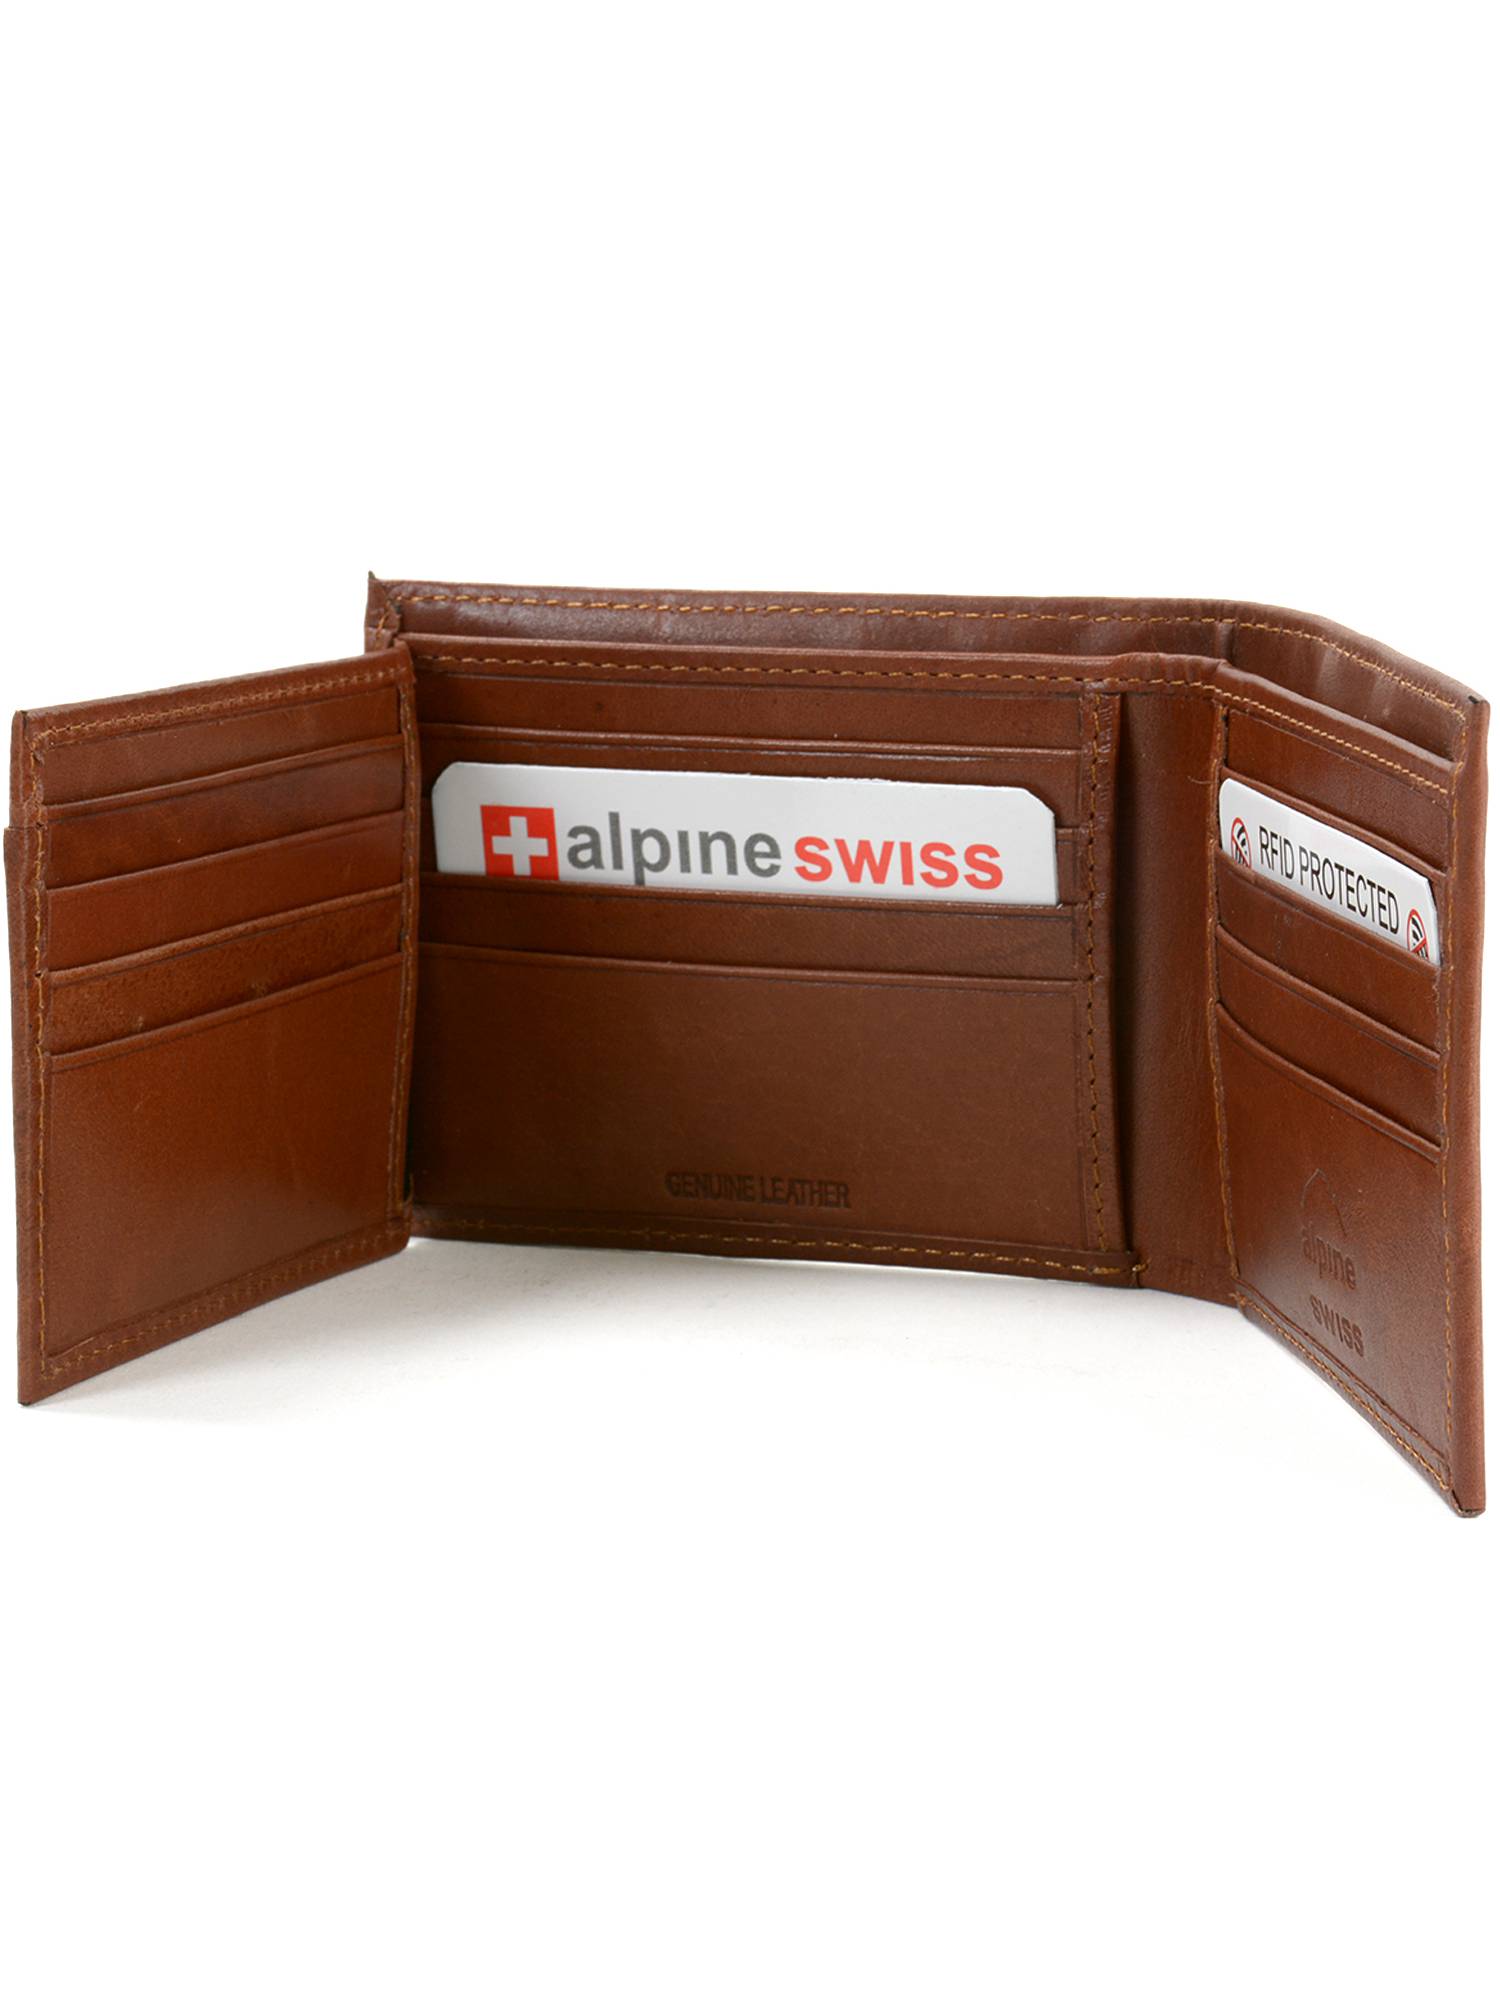 Alpine Swiss Mens Leather RFID Bifold Wallet 2 ID Windows Divided Bill Section - image 2 of 7